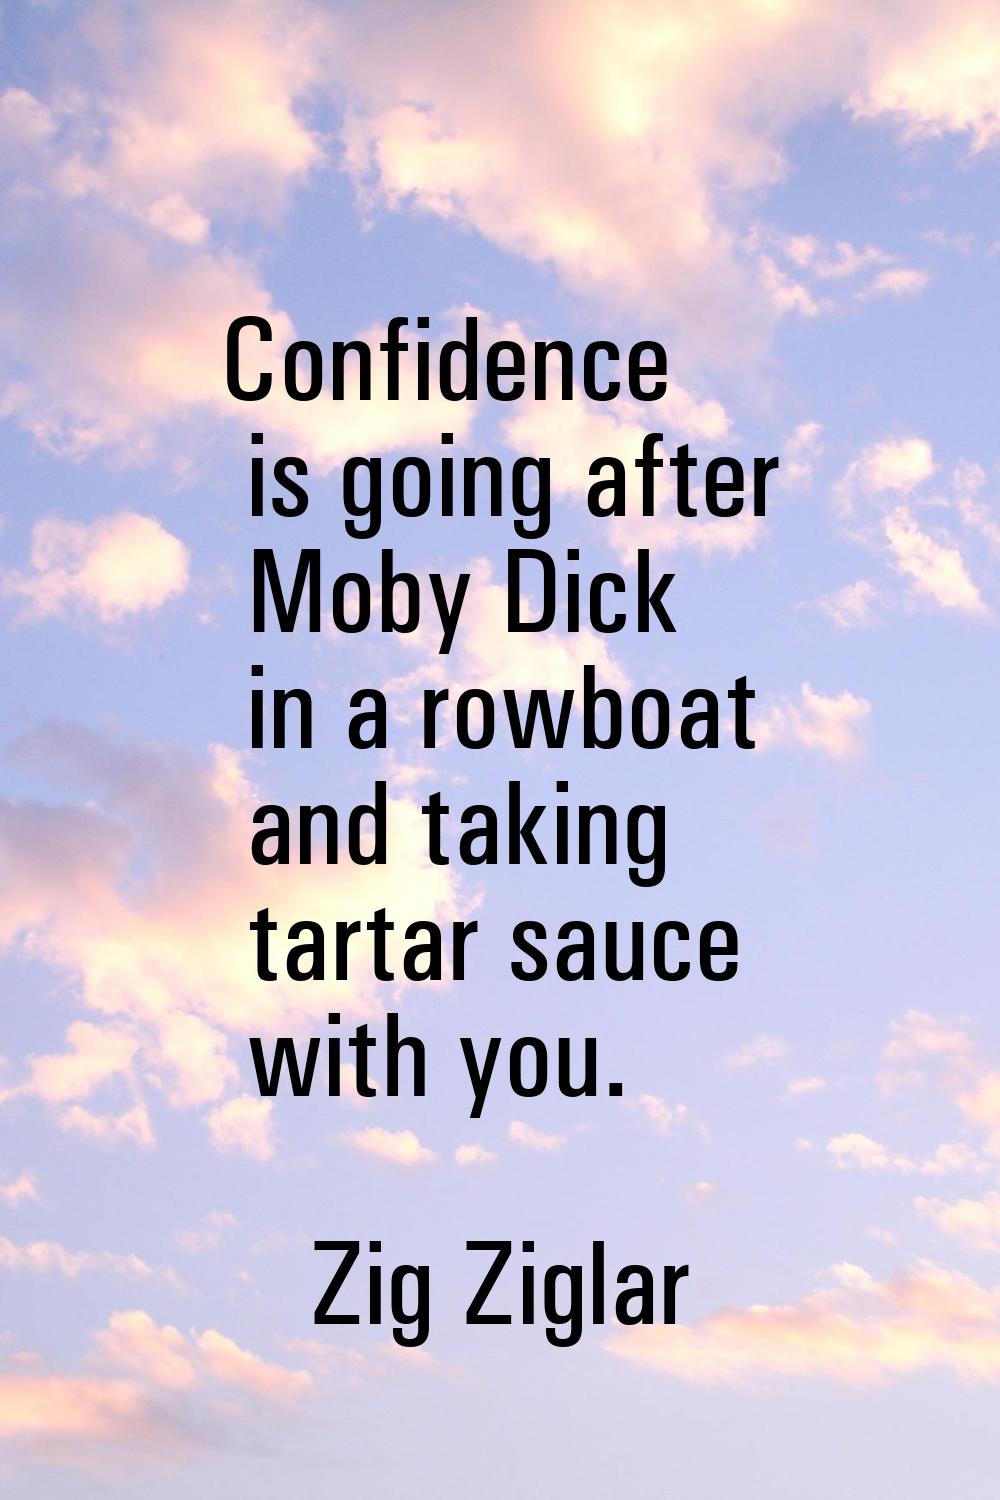 Confidence is going after Moby Dick in a rowboat and taking tartar sauce with you.